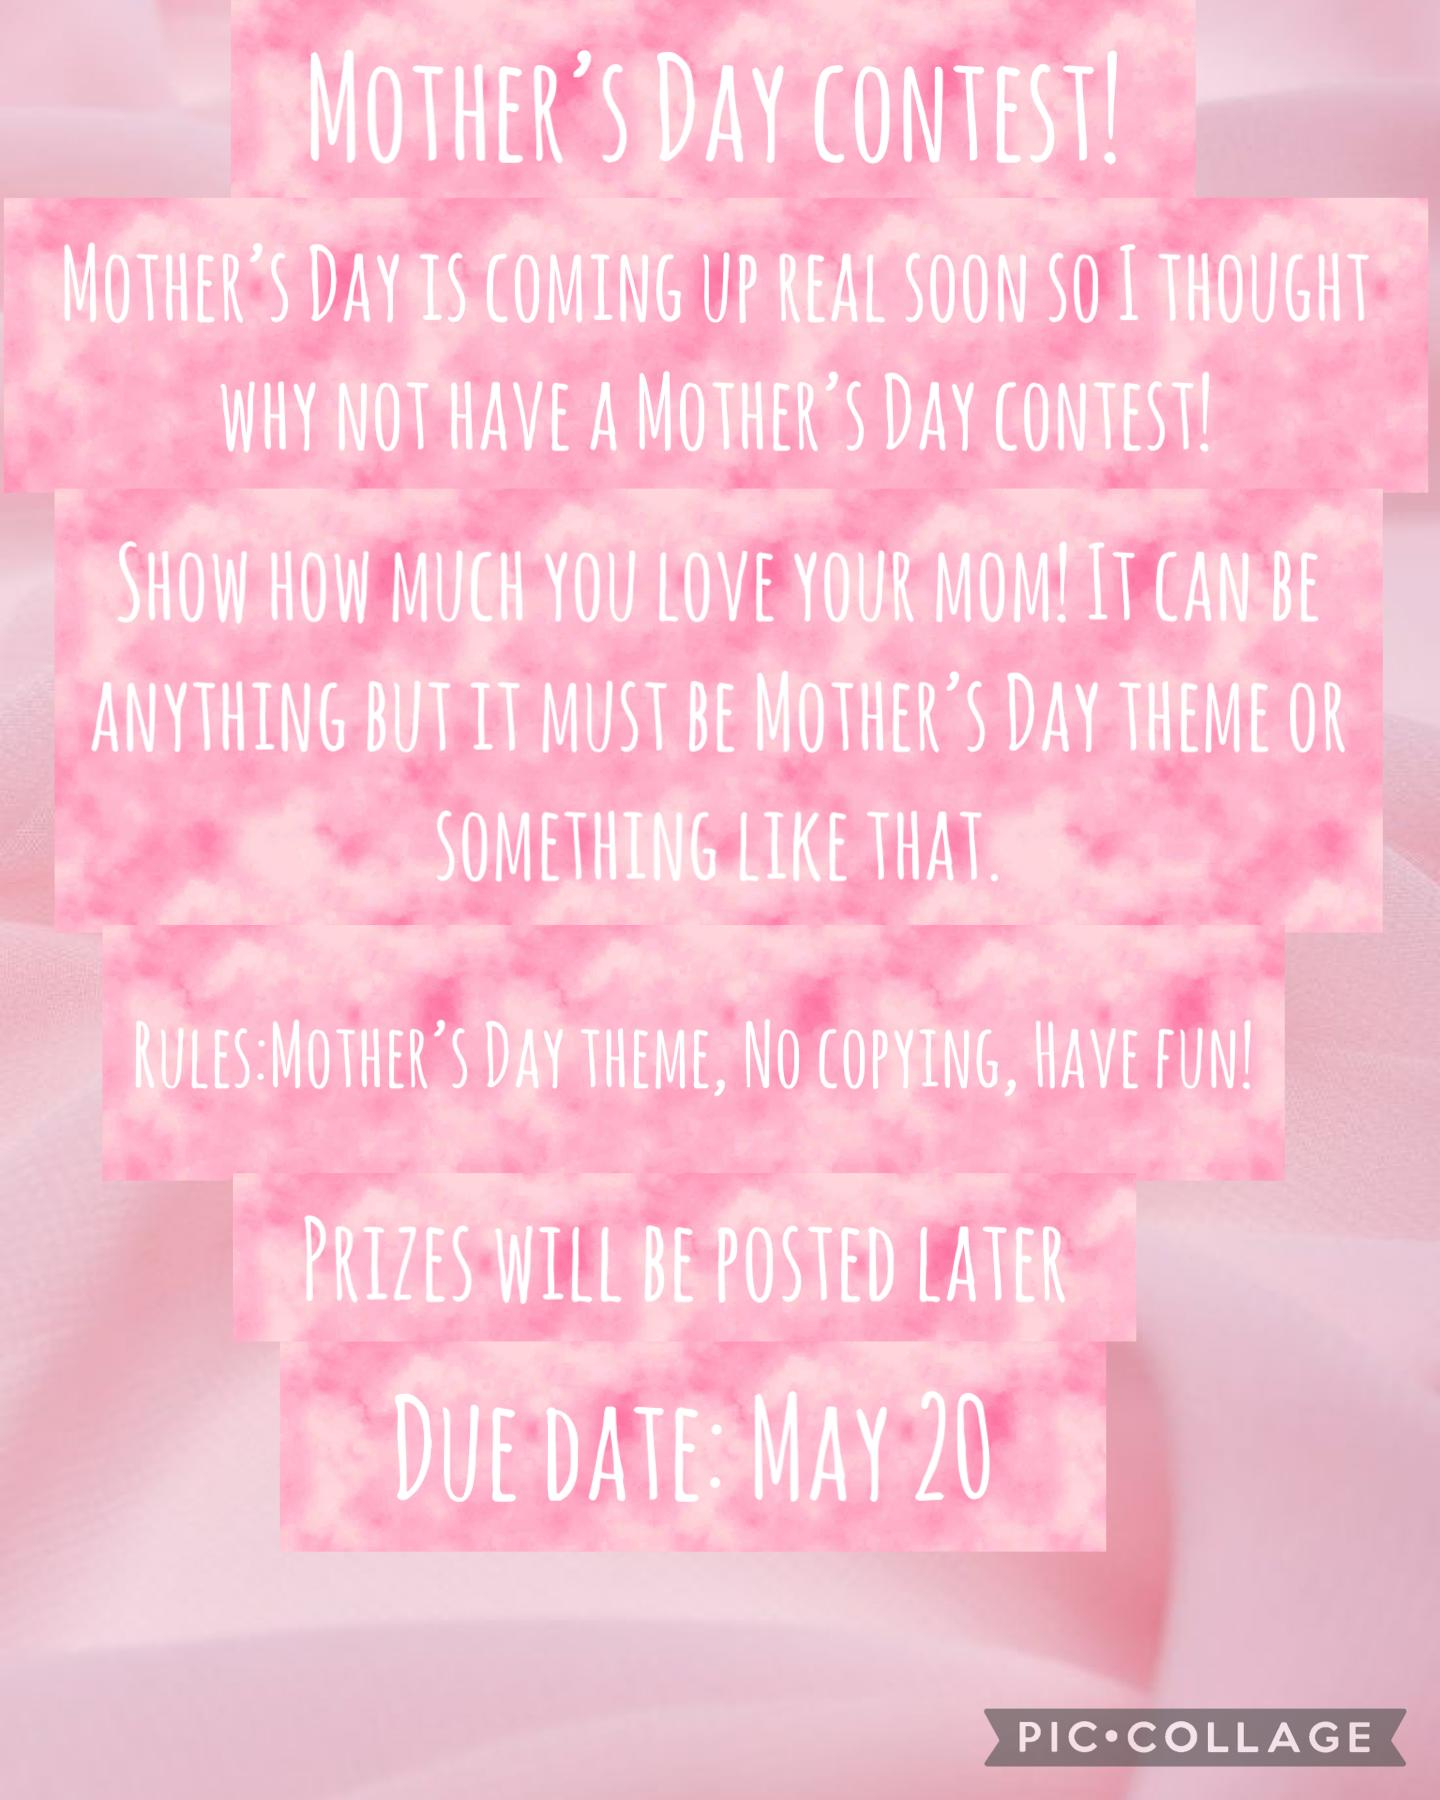 Mother’s Day contest!! Due Date: May 20